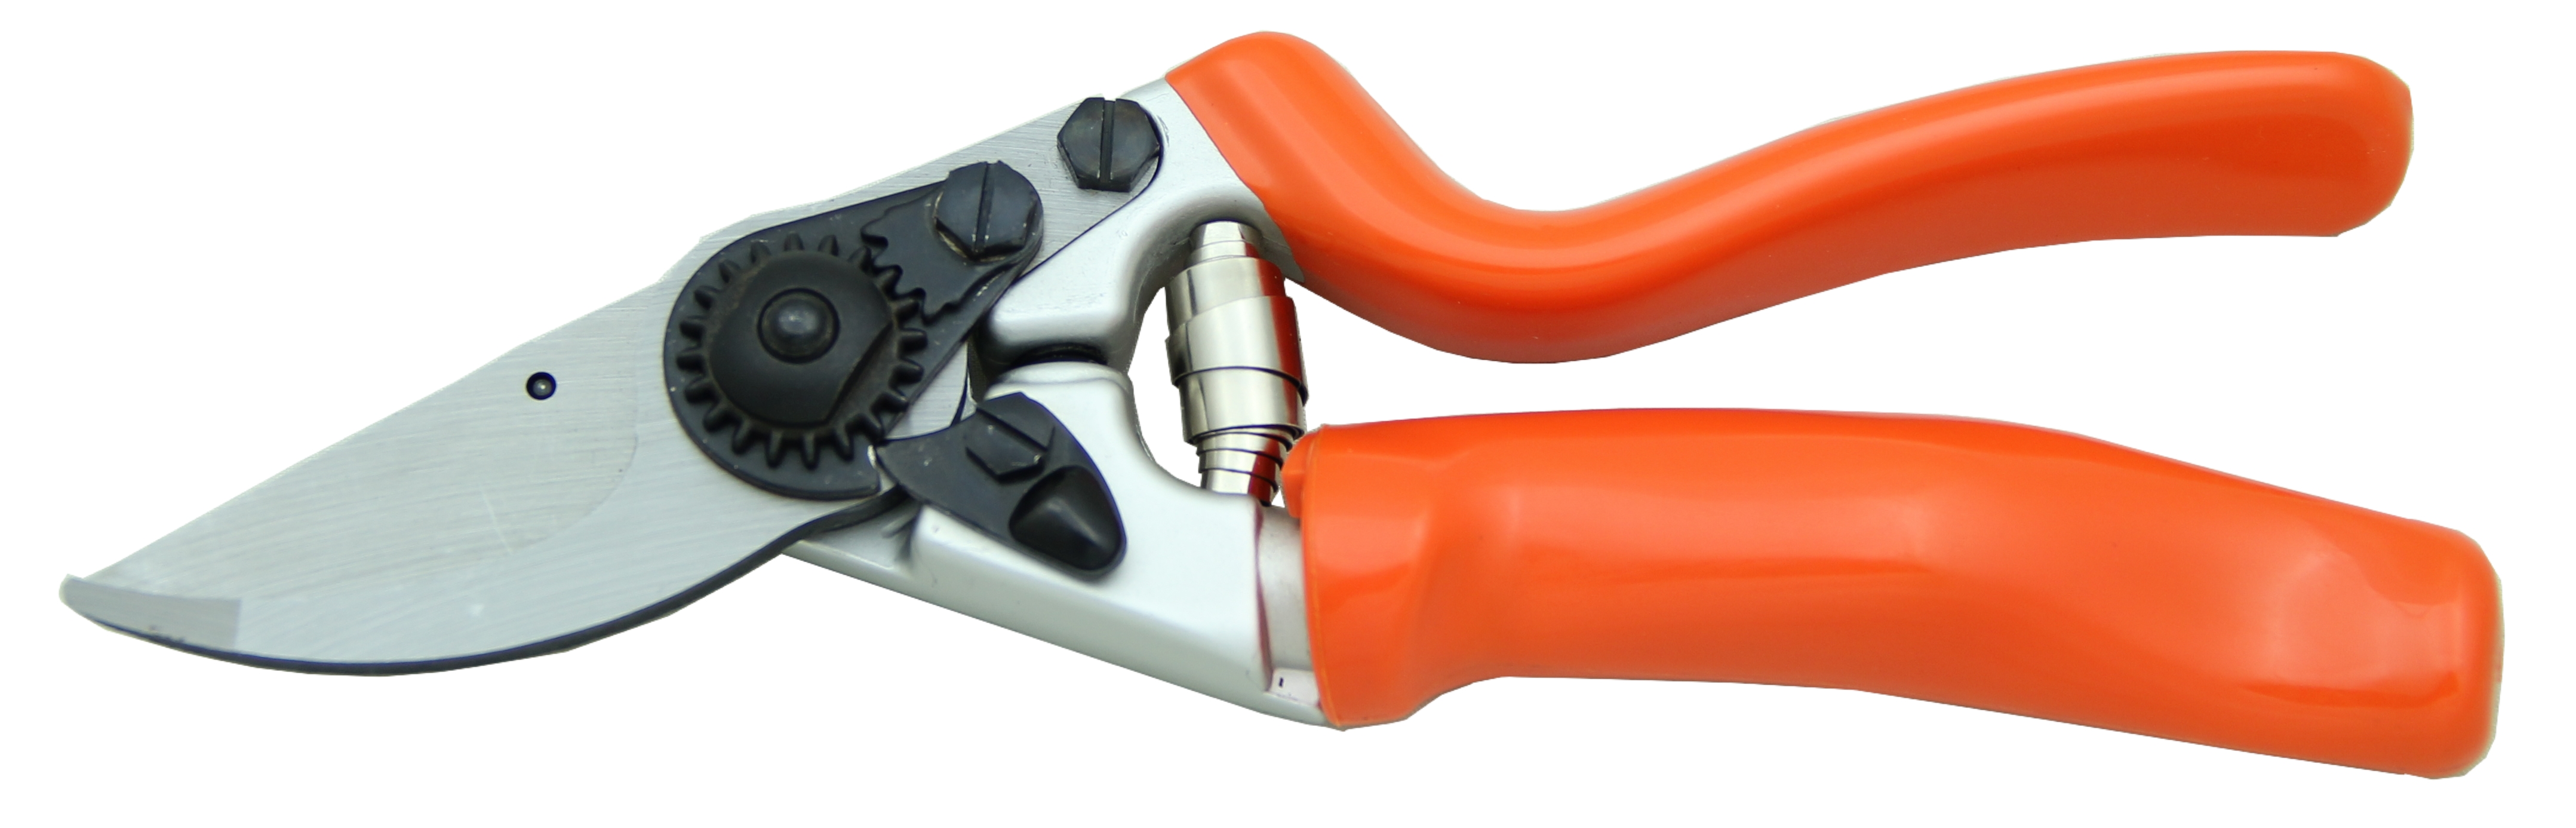 8” Drop Forged Bypass Pruner with Rotating Handle